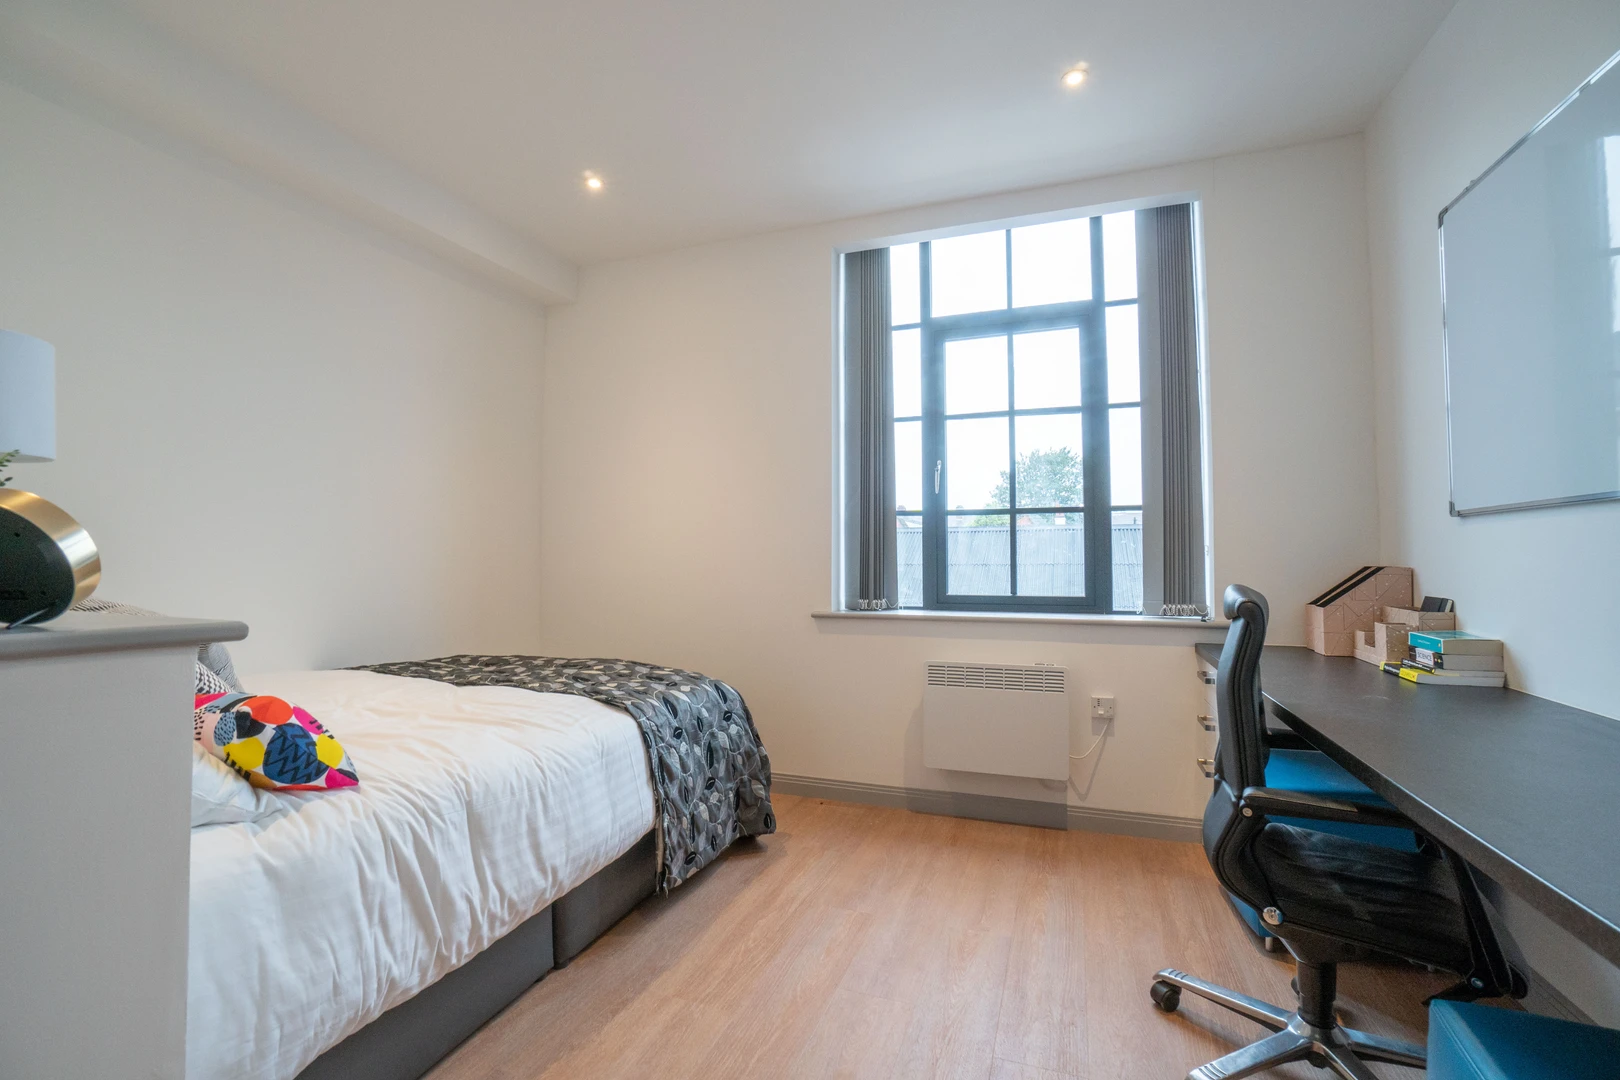 Cheap private room in Leicester